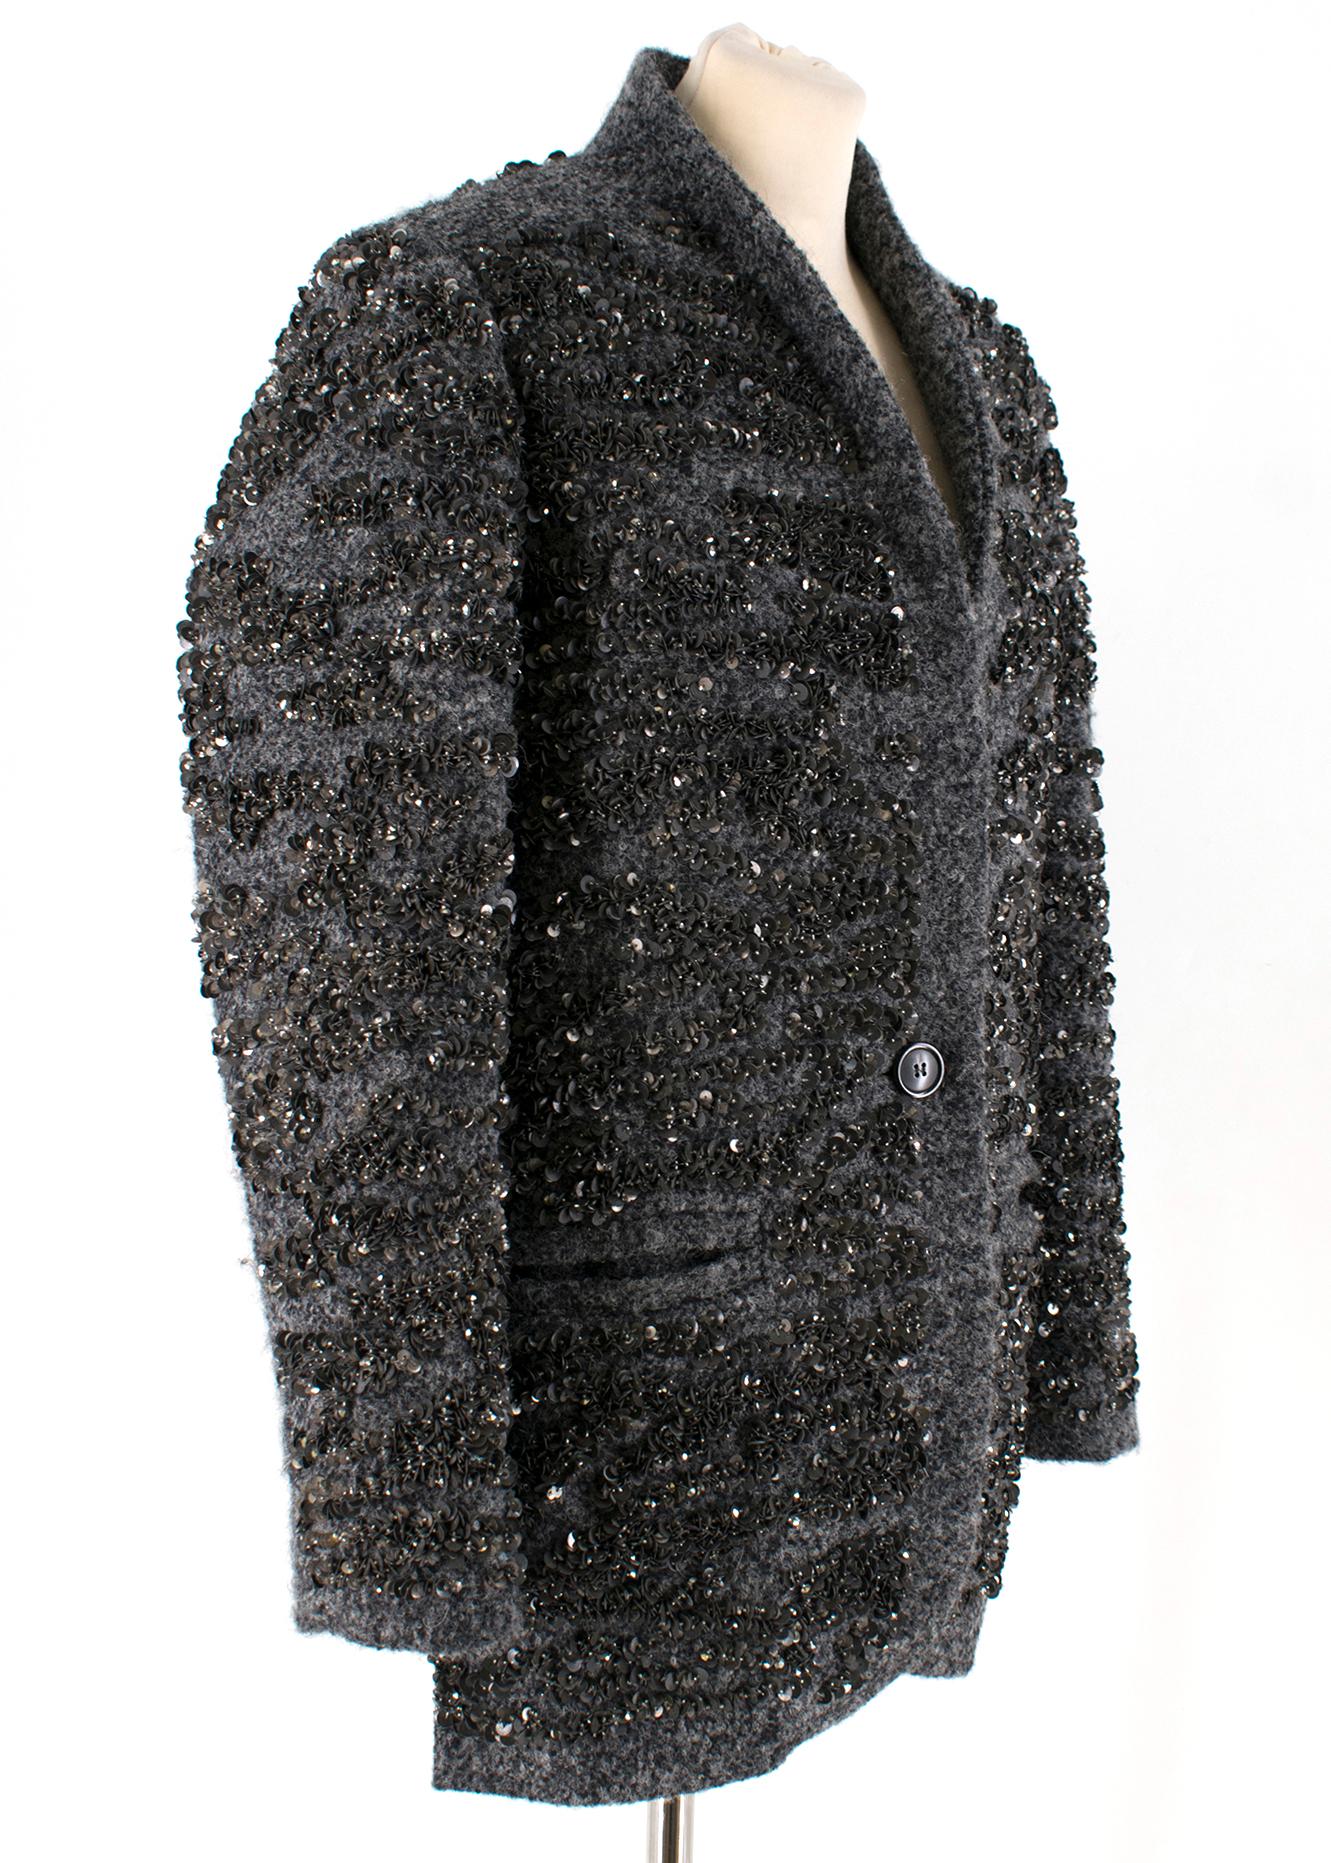 Isabel Marant Gunmetal Sequin Wool Blend Jacket 

- Gunmetal Grey Jacket
- Sequin and Bead embellished farbic 
- Button front closure
- Front welt pockets
- Padded shoulders
- Stand up collar 
- Fully lined 
- Heavy weight 

Please note, these items